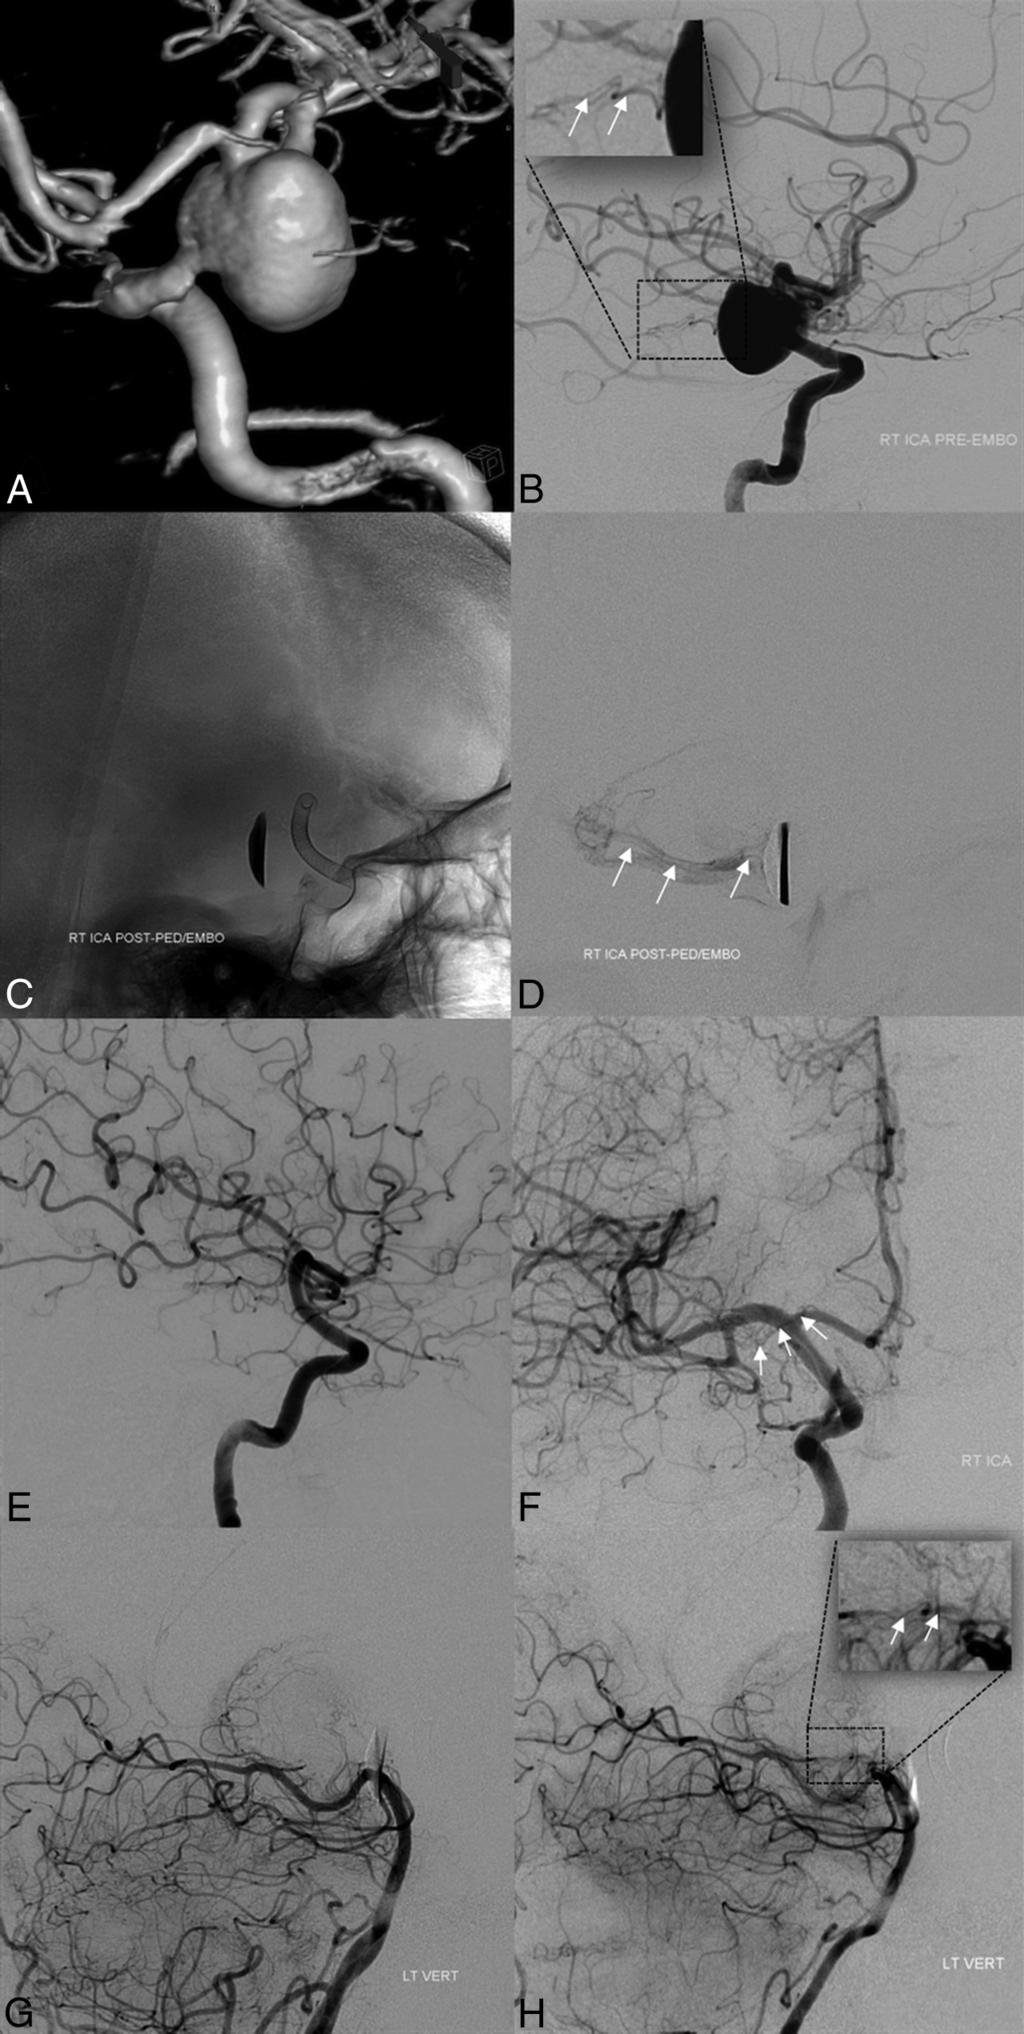 FIG 3. Baseline pretreatment 3D-DSA (A) and lateral projection DSA (B) demonstrating a large anterior choroidal artery aneurysm.